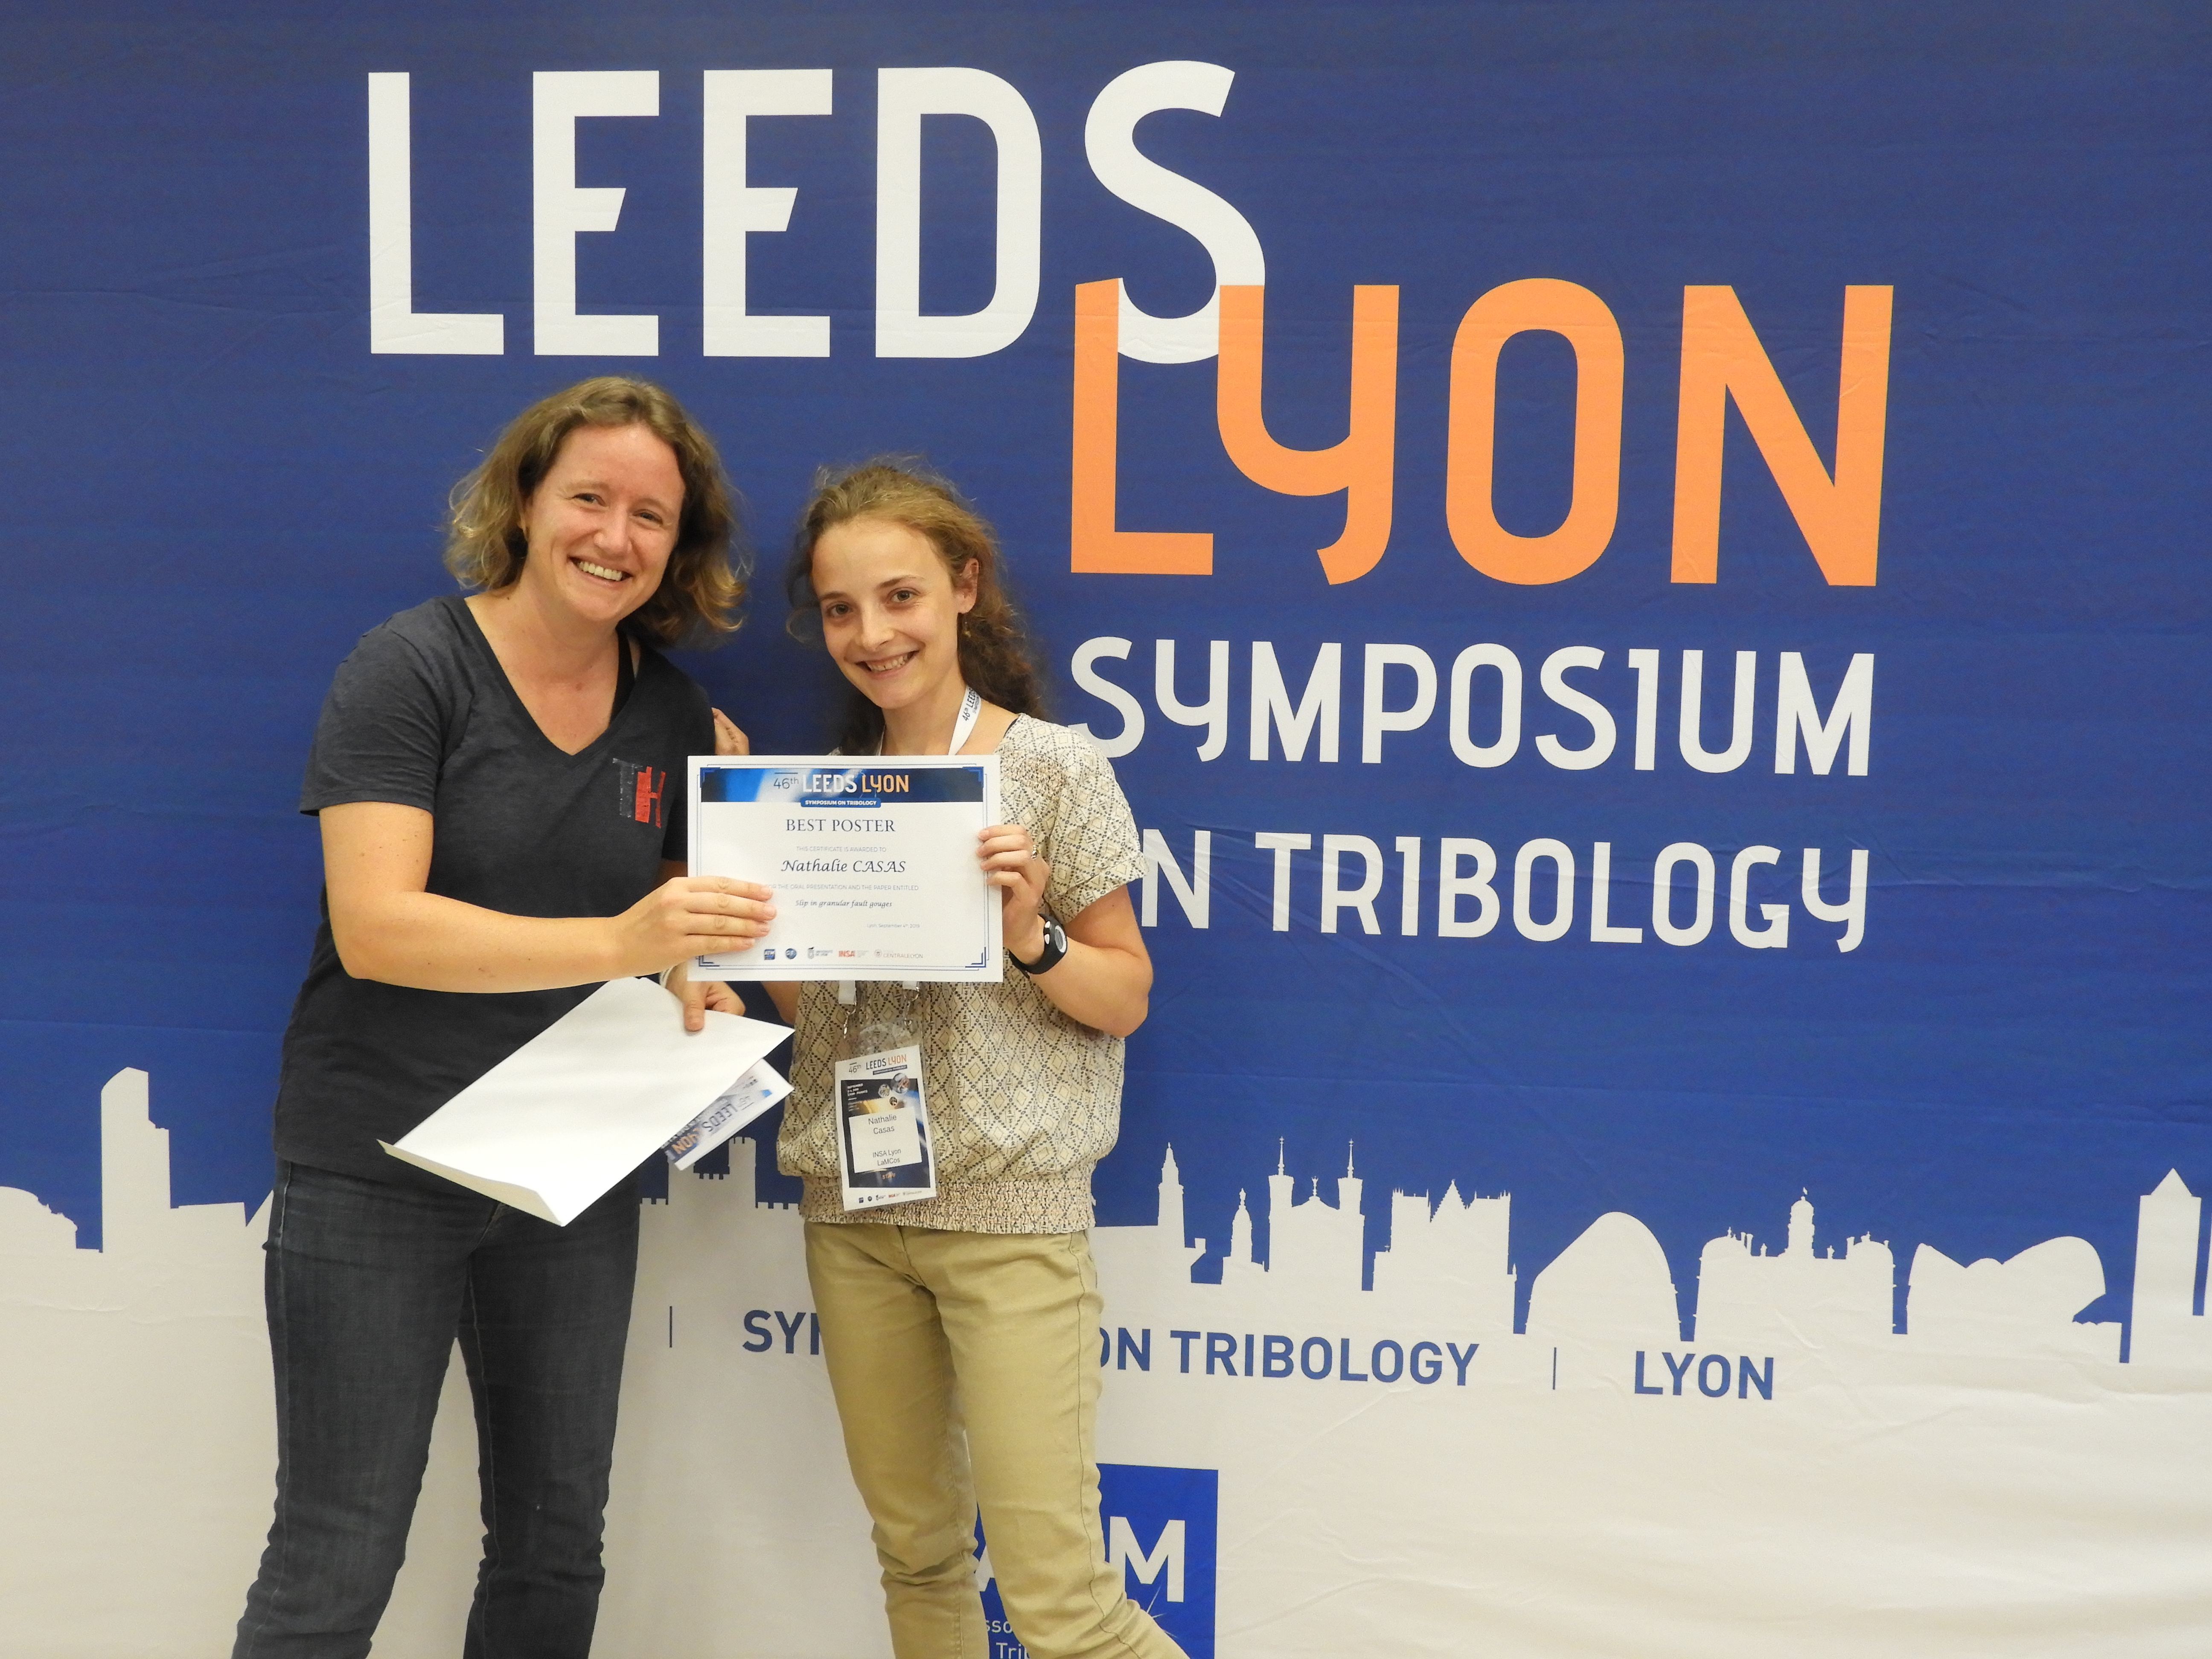 Nathalie Casas (right) receives the best poster award from Sissi De Beer (left)